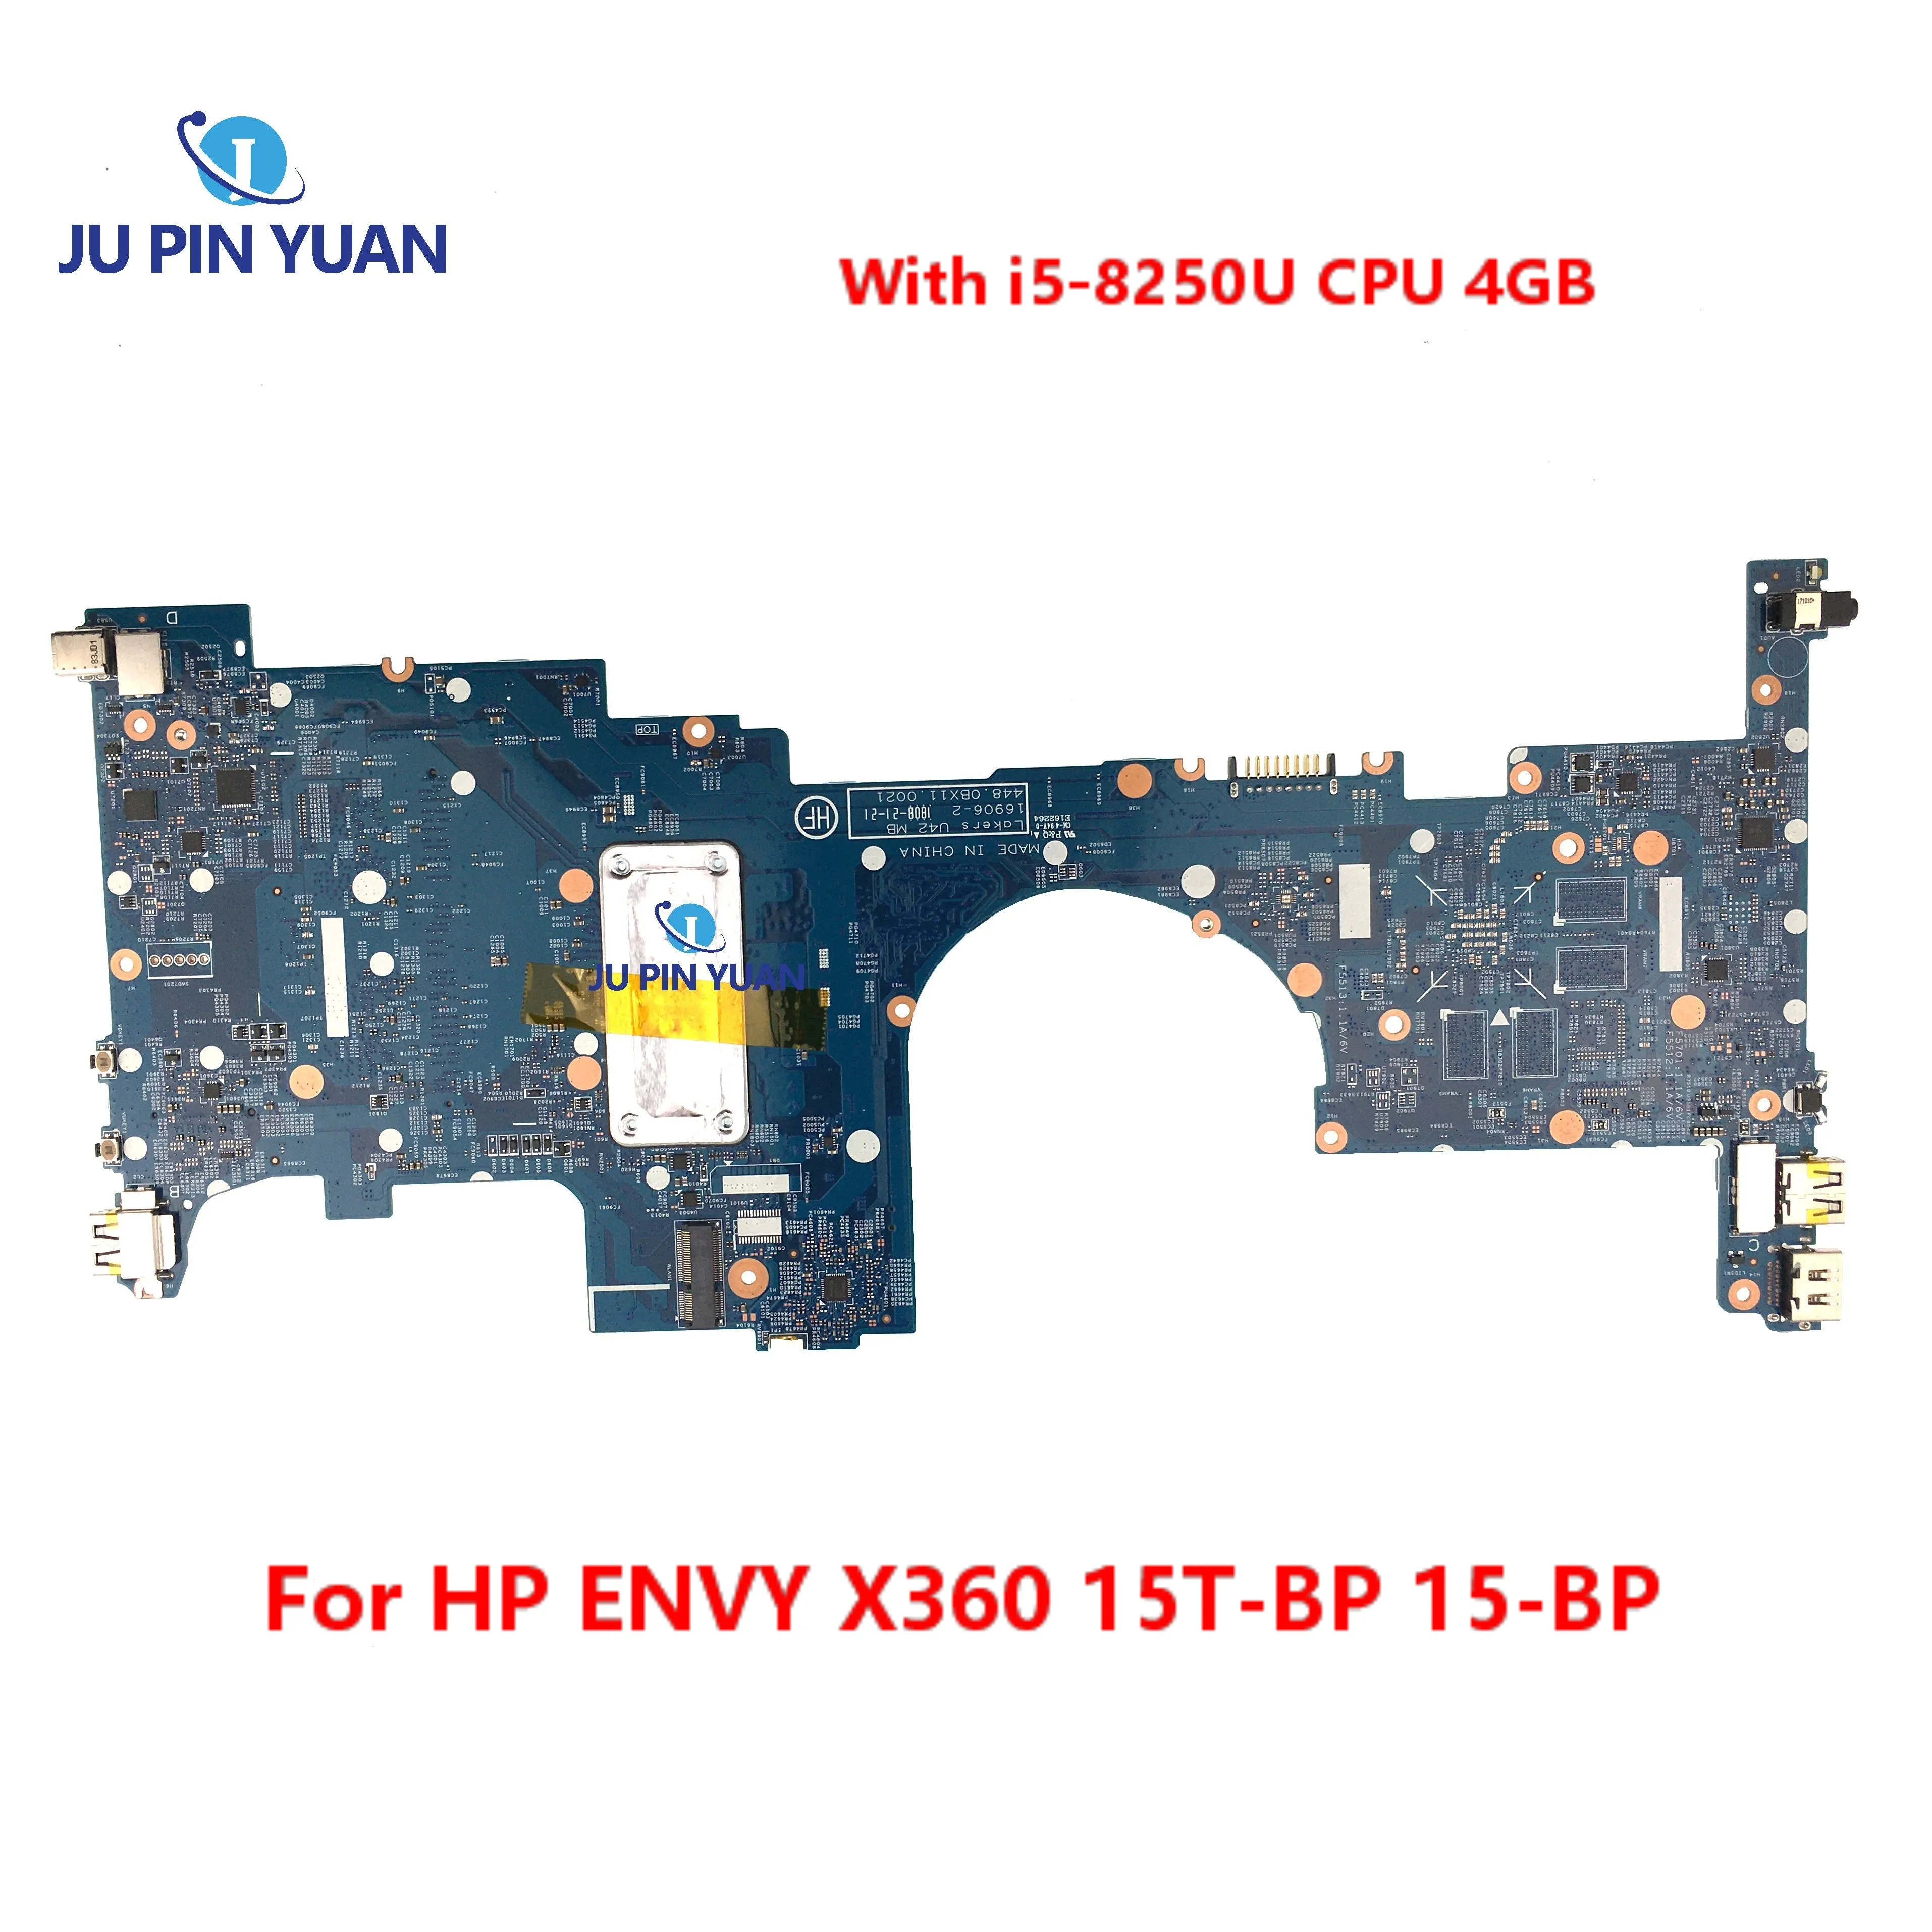 

For HP ENVY X360 15T-BP 15-BP Laptop Motherboard 16906-2 With i5-8250U 4GB Mainboard 935000-601 935000-001 100% Tested